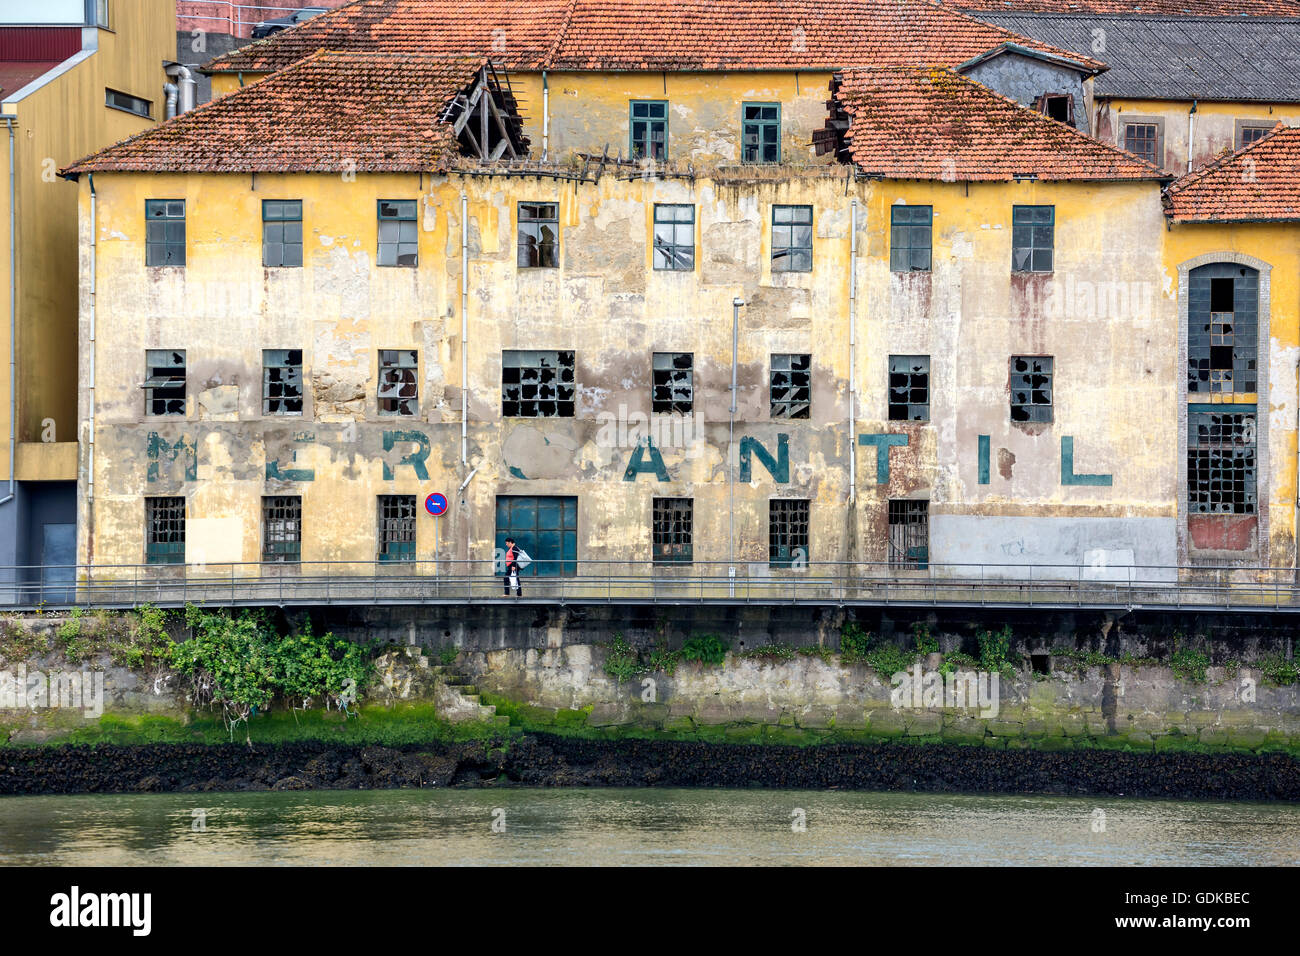 old warehouse on Douro Deterioration lettering Mercantil, Porto, District of Porto, Portugal, Europe, Travel, Travel Photography Stock Photo